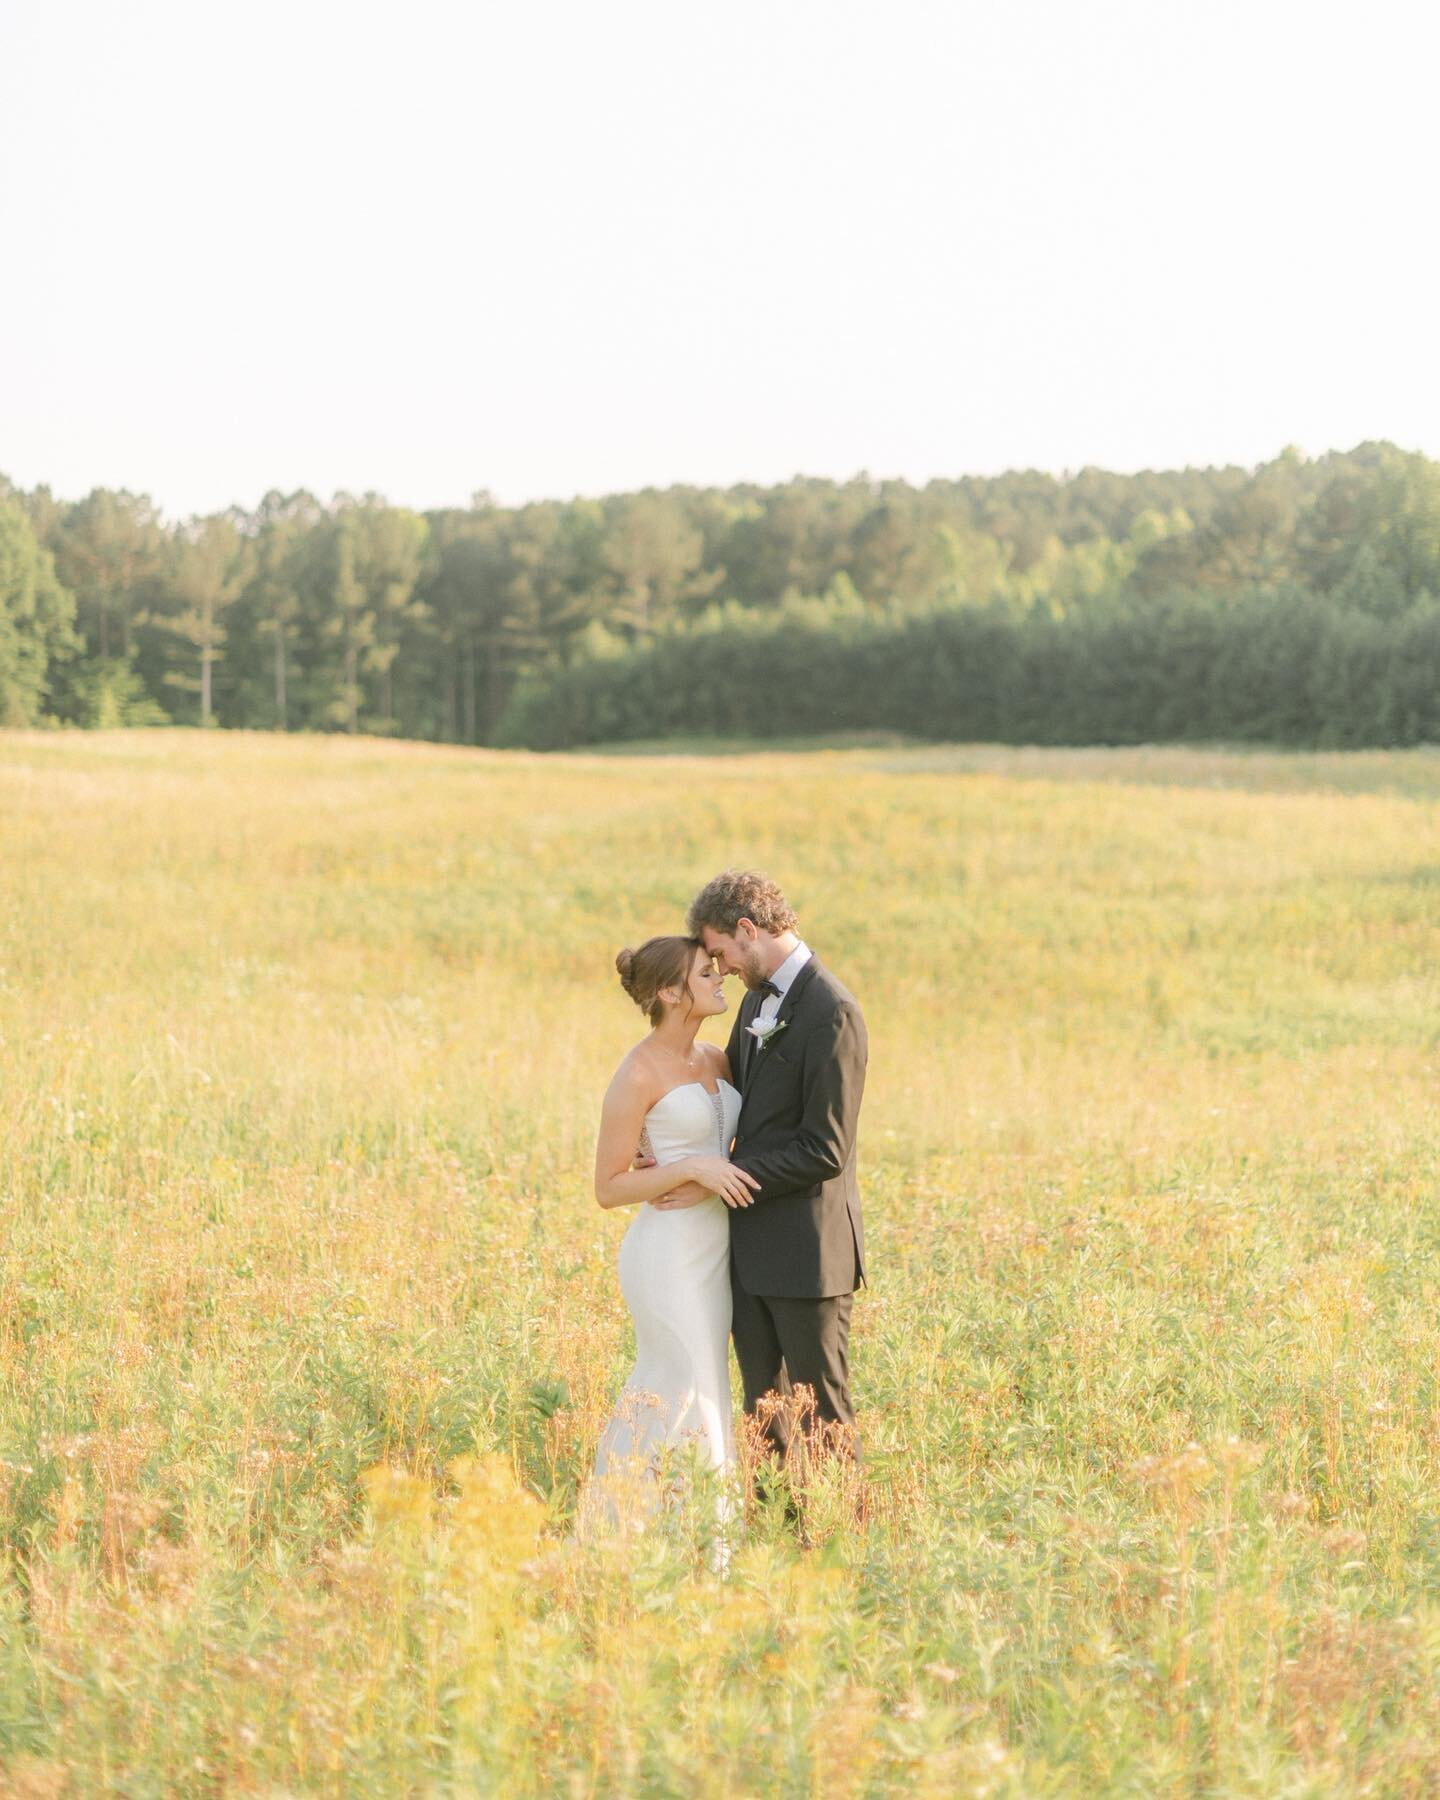 you would never know from these golden hour hues that this wedding took place in may! 🌾✨ it was a stunning day for abbie + truett, and i&rsquo;m recapping it all on the blog today! tap link in bio for more snapshots of their dreamy day.